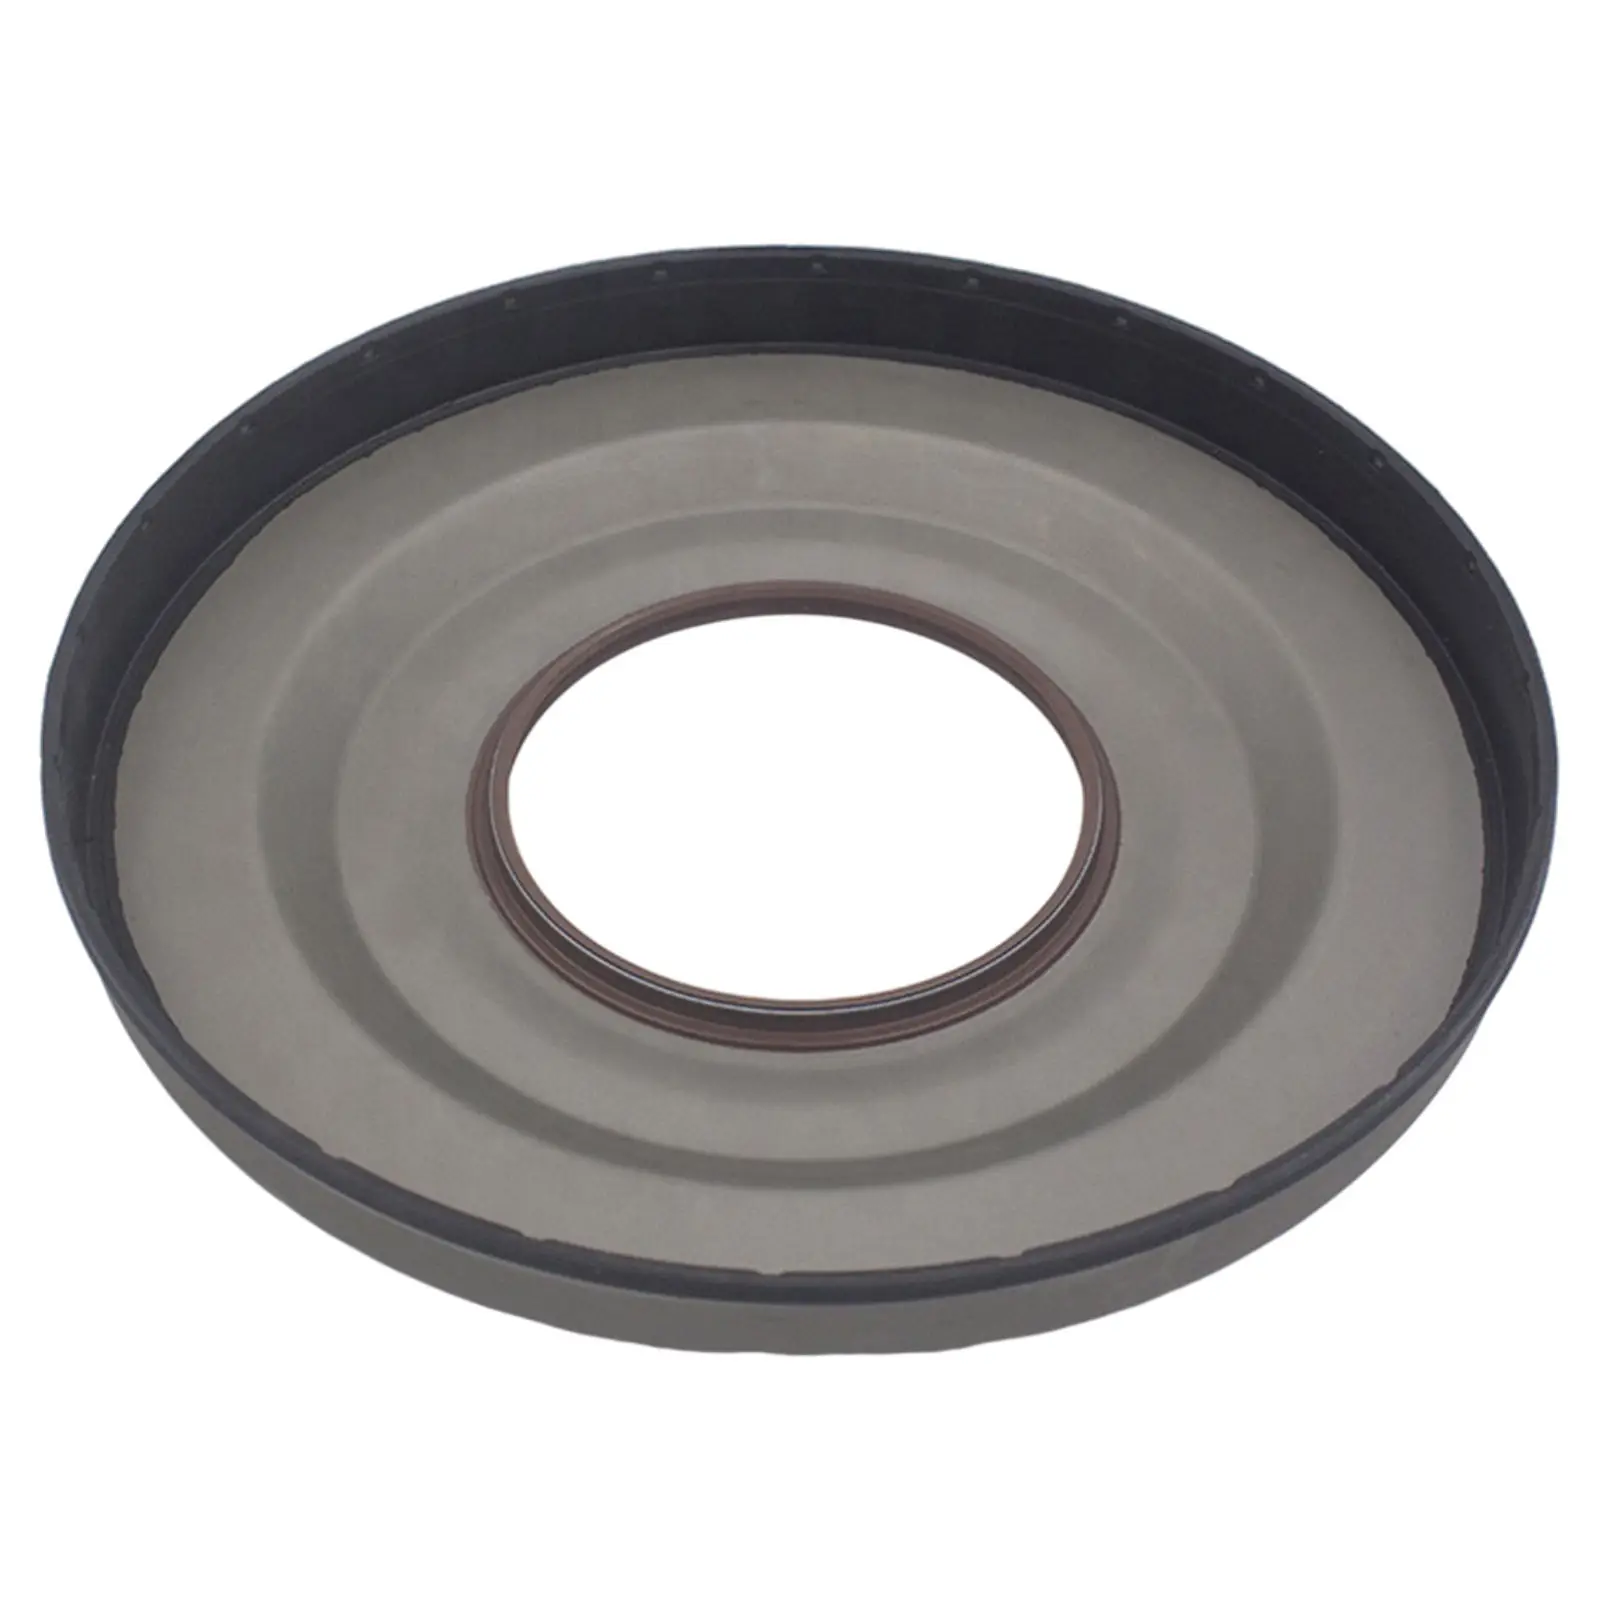 Front Cover Oil Seal, Stainless Steel, for Ford Mondeo, Parts Replace Accessories MPS6